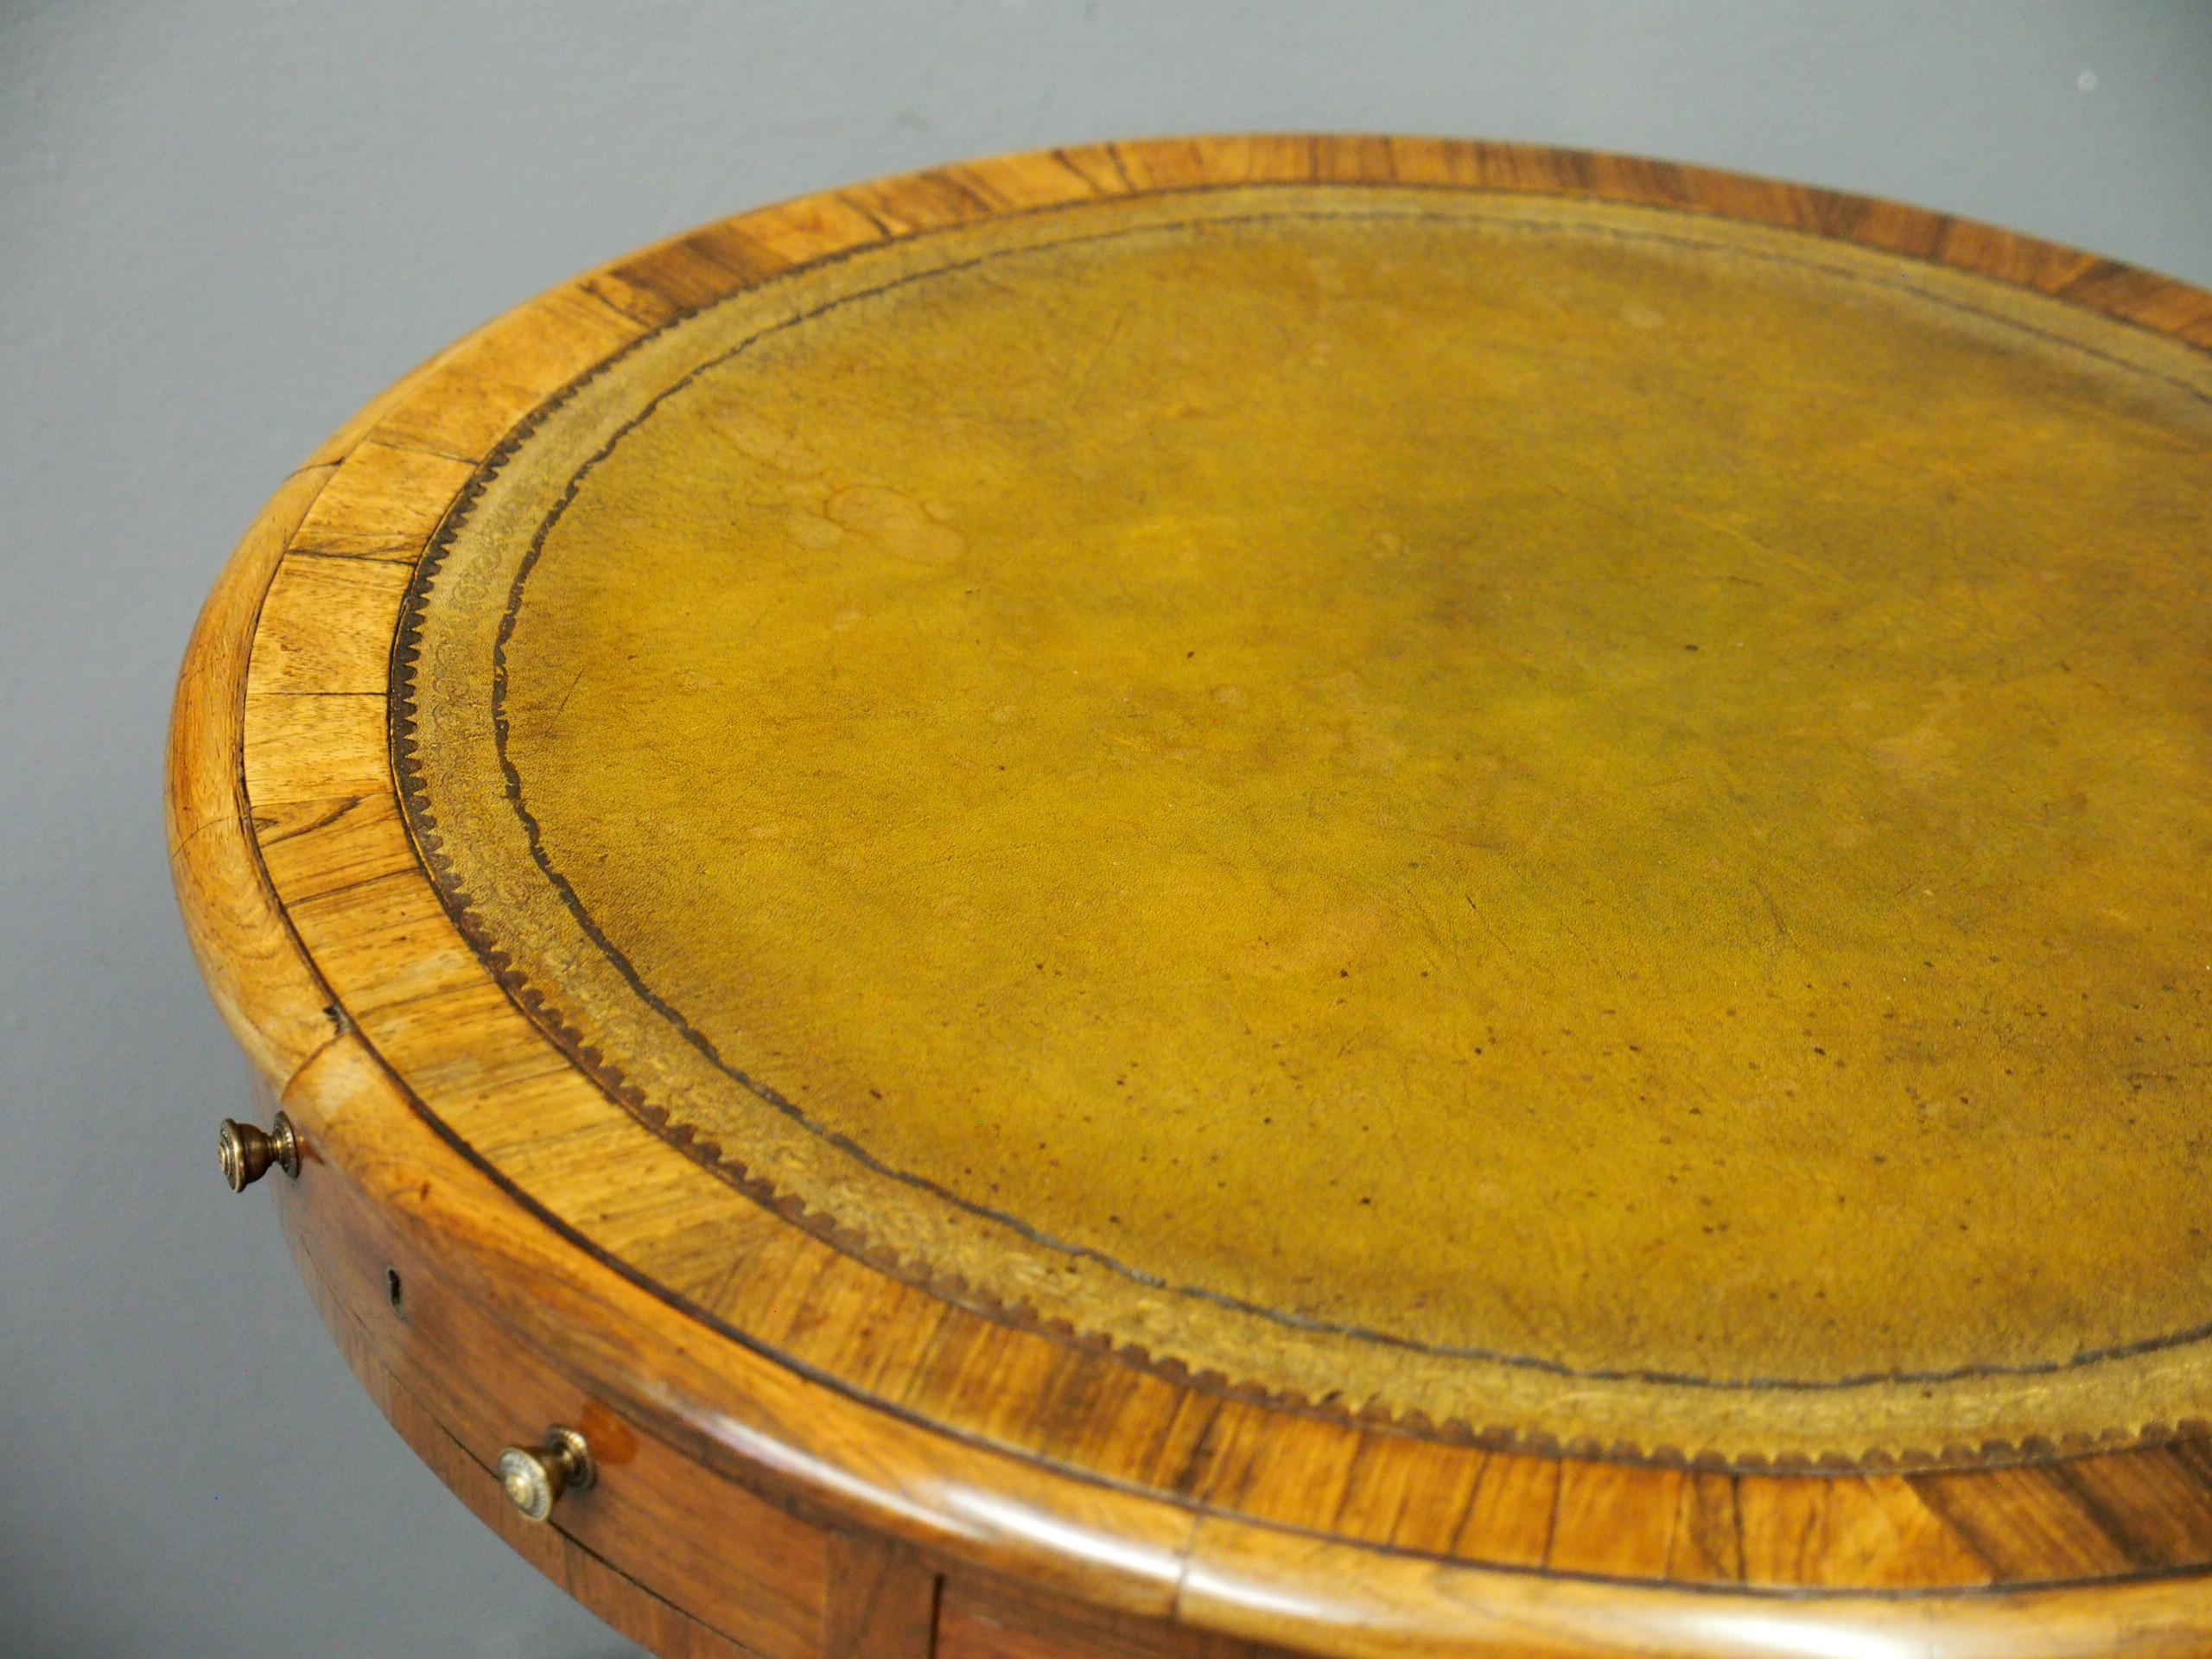 George IV rosewood and leather top drum or rent table of diminutive proportions, circa 1830. With a gilded and tooled green leather insert to the top, contained in a circular bezel of crossbanded rosewood, with an ogee moulding. The apron has a